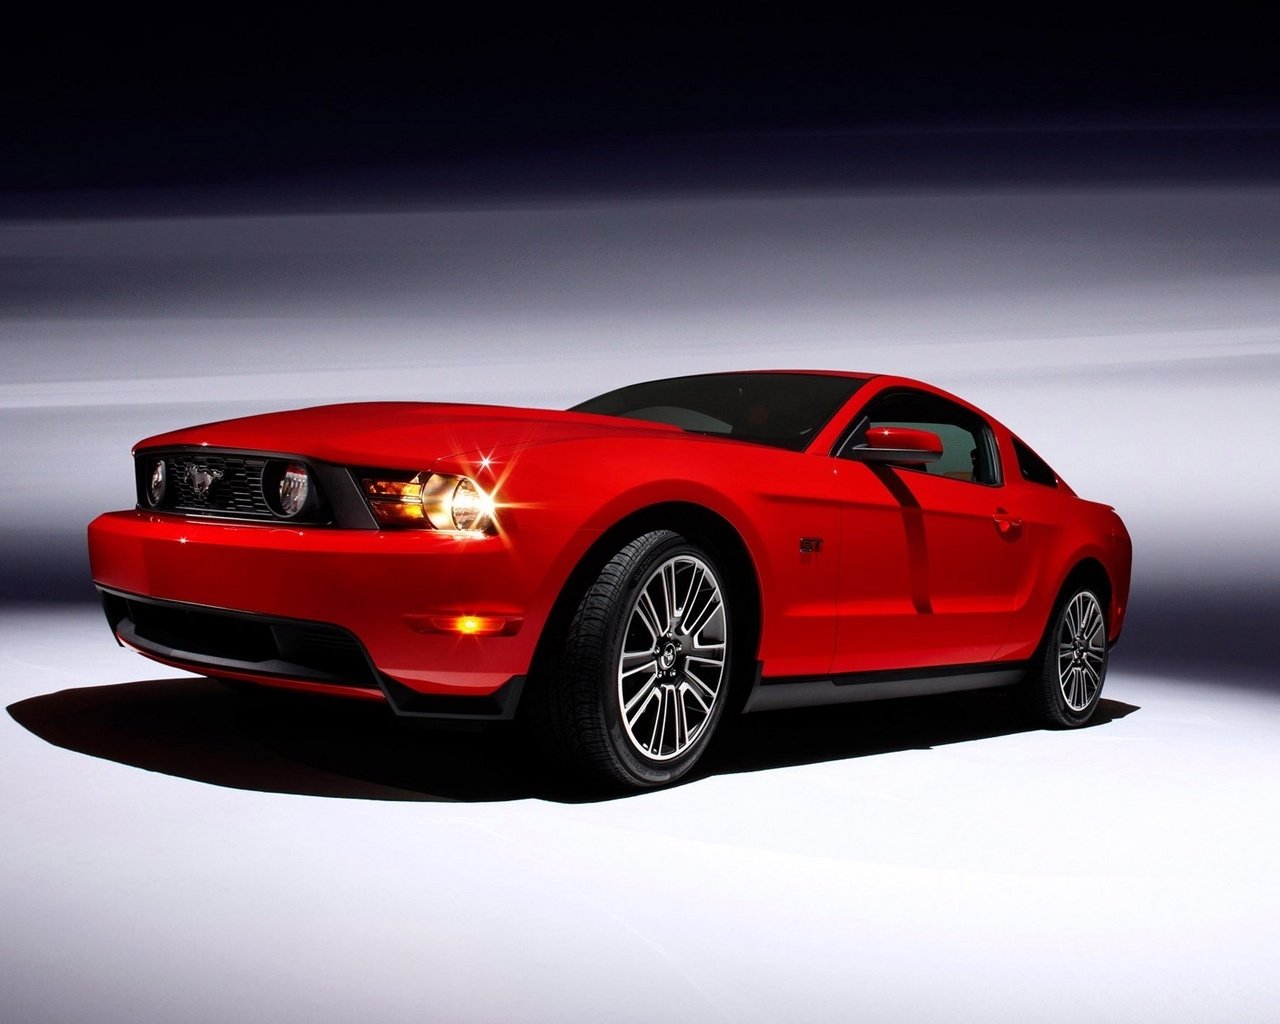 Ford Mustang Coupe 2010 for 1280 x 1024 resolution